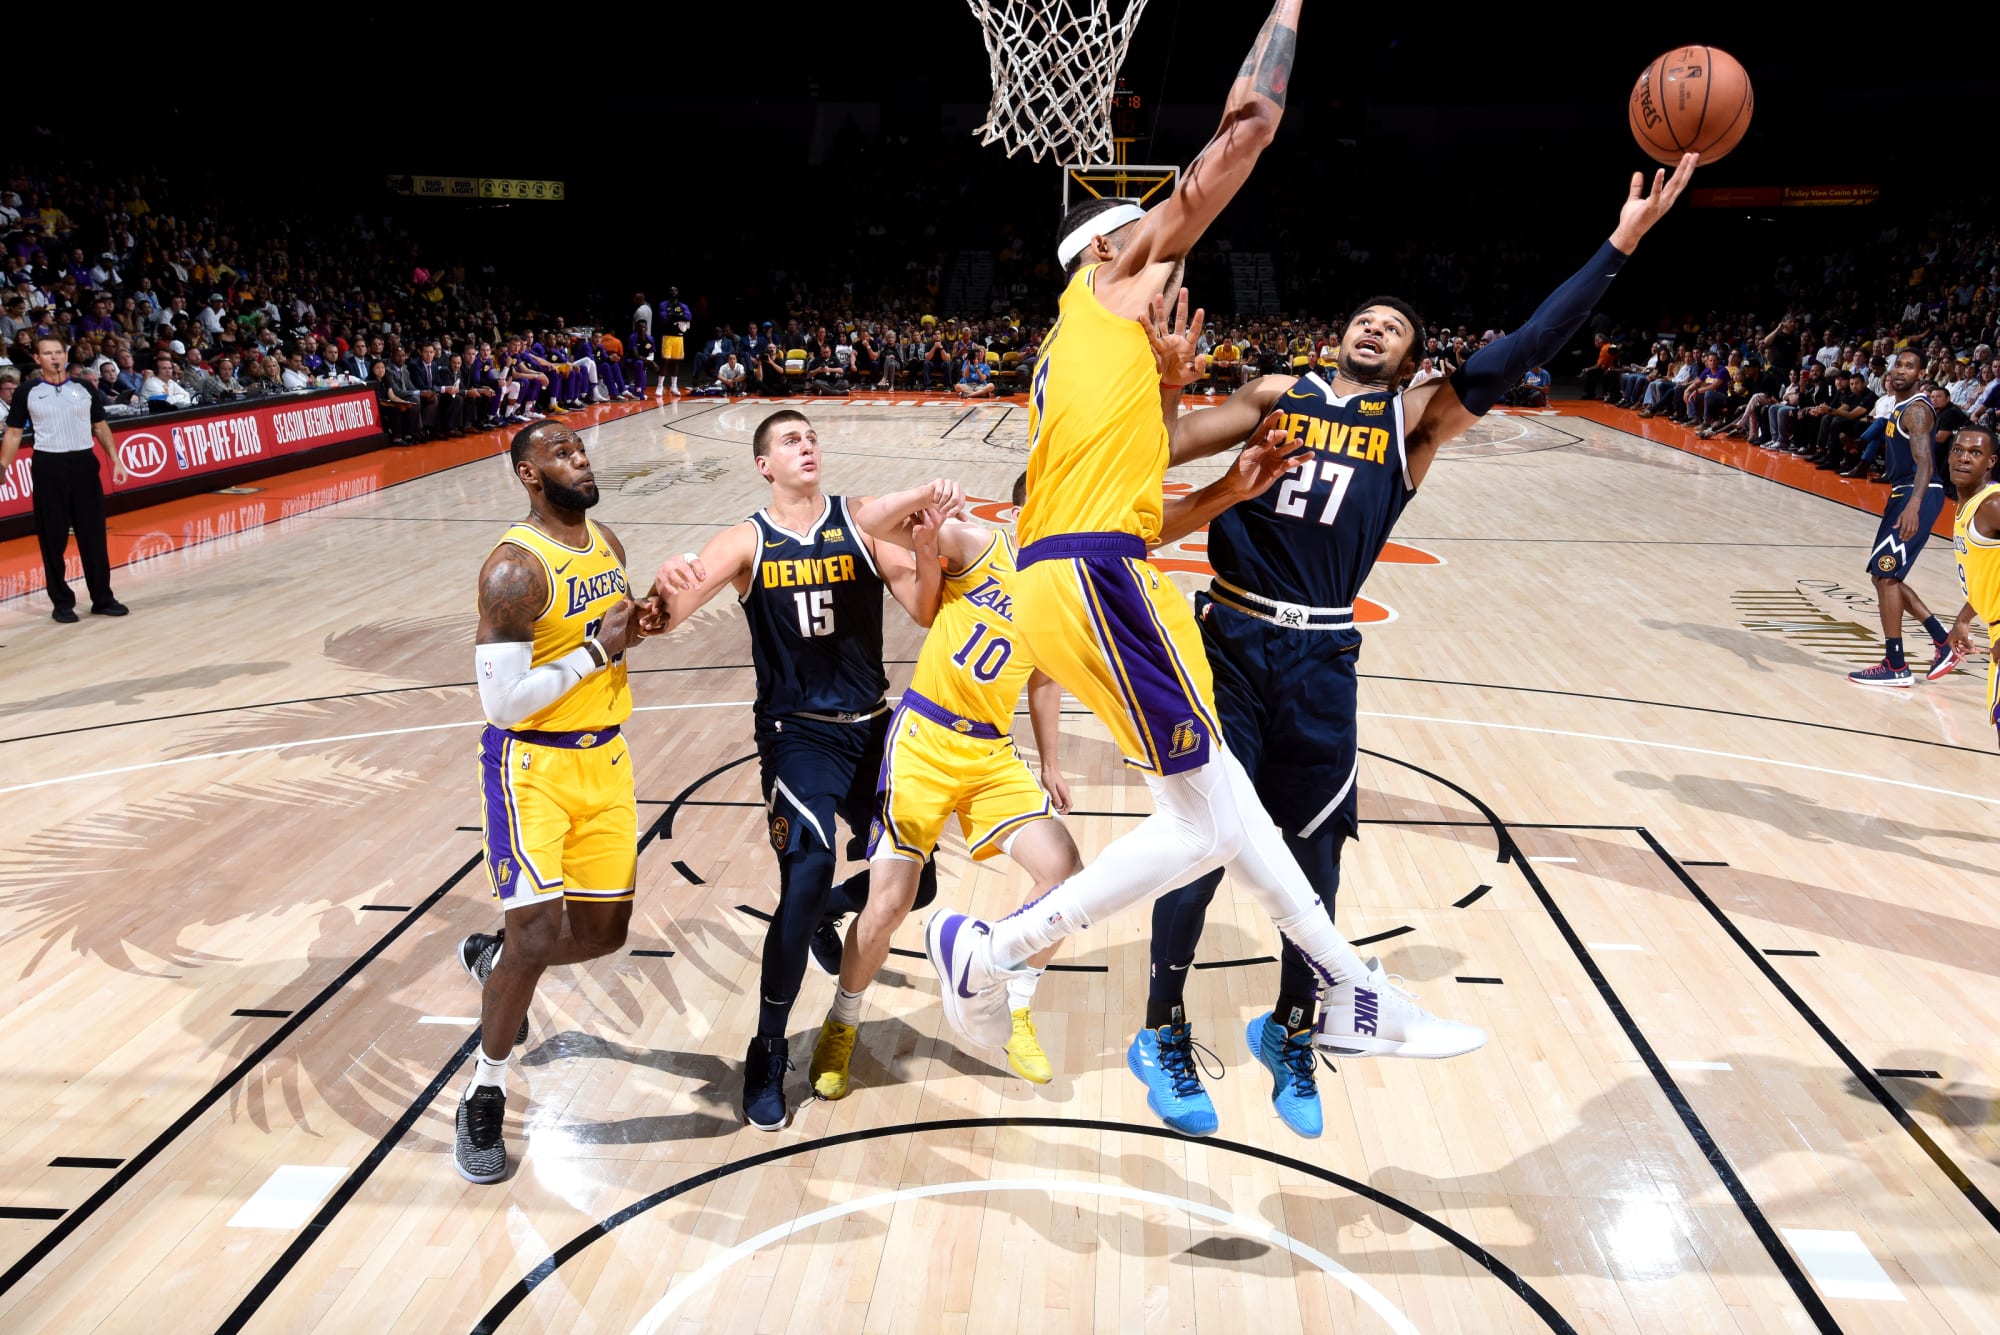 Denver Nuggets vs. L.A. Lakers rematch What to watch for